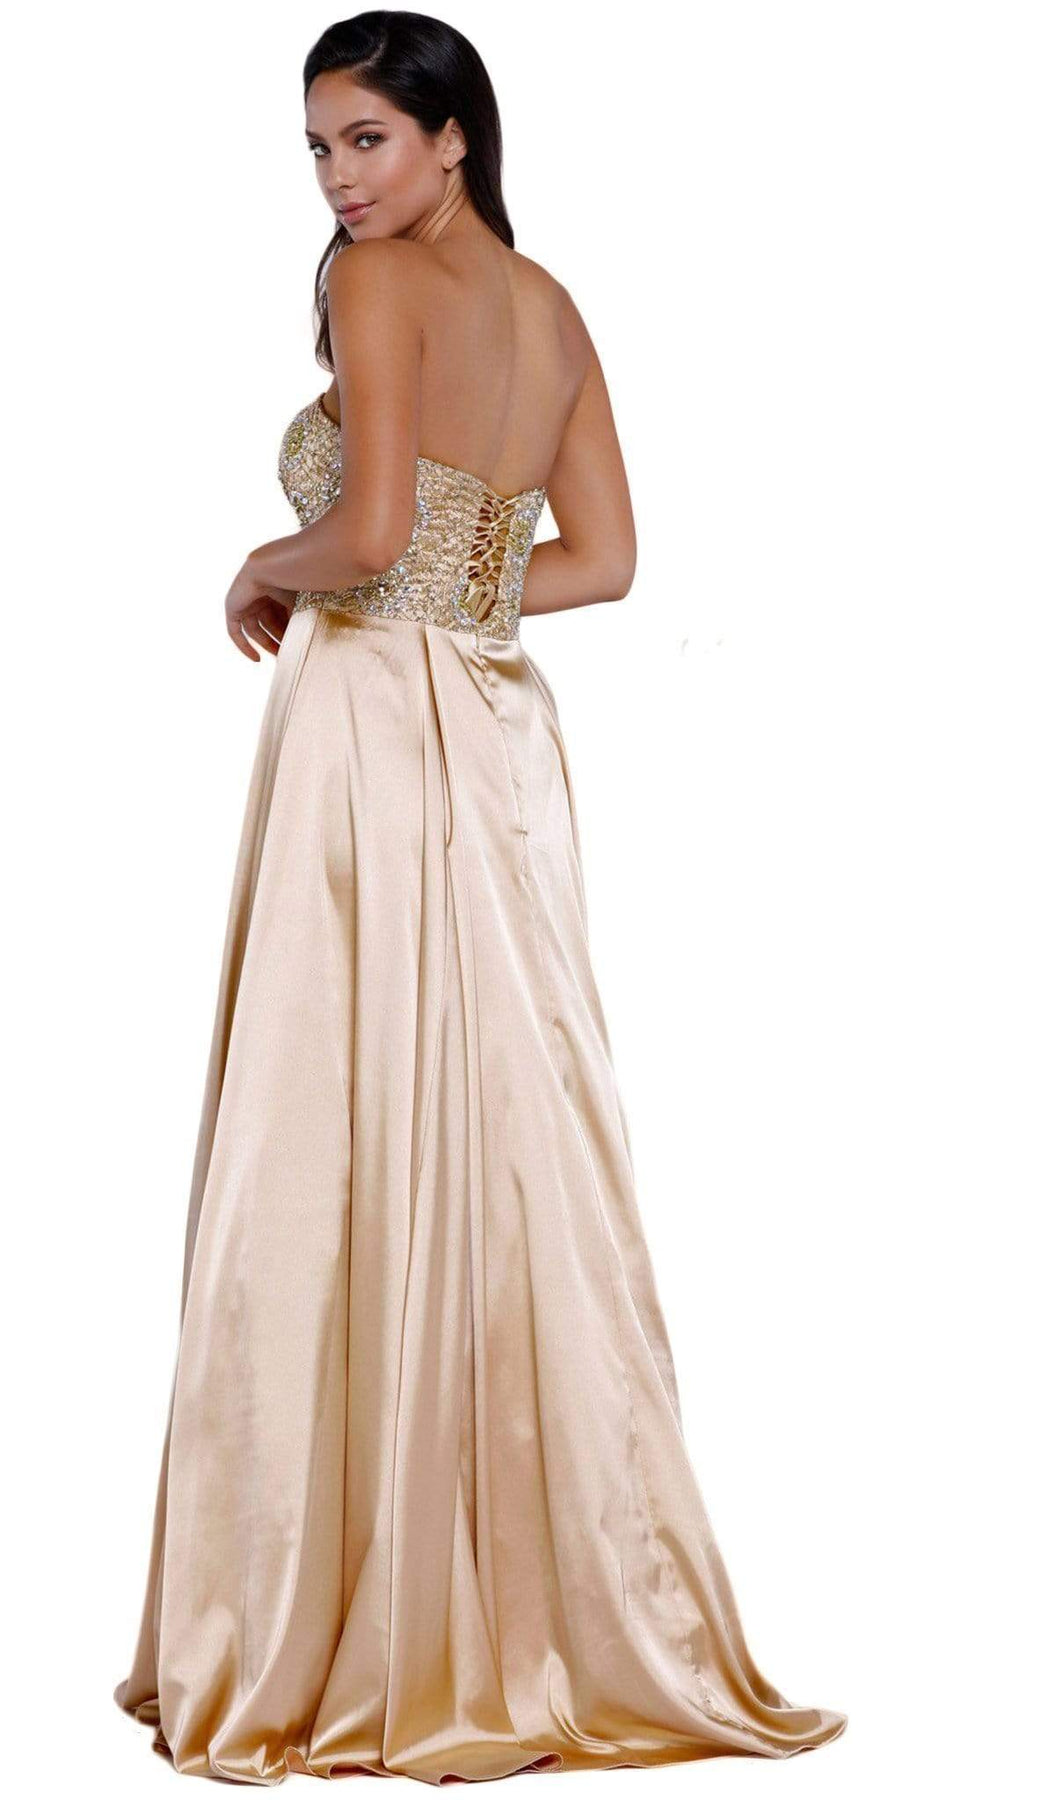 Nox Anabel - 8186 Metallic Embellished Strapless Long Evening Gown Special Occasion Dress